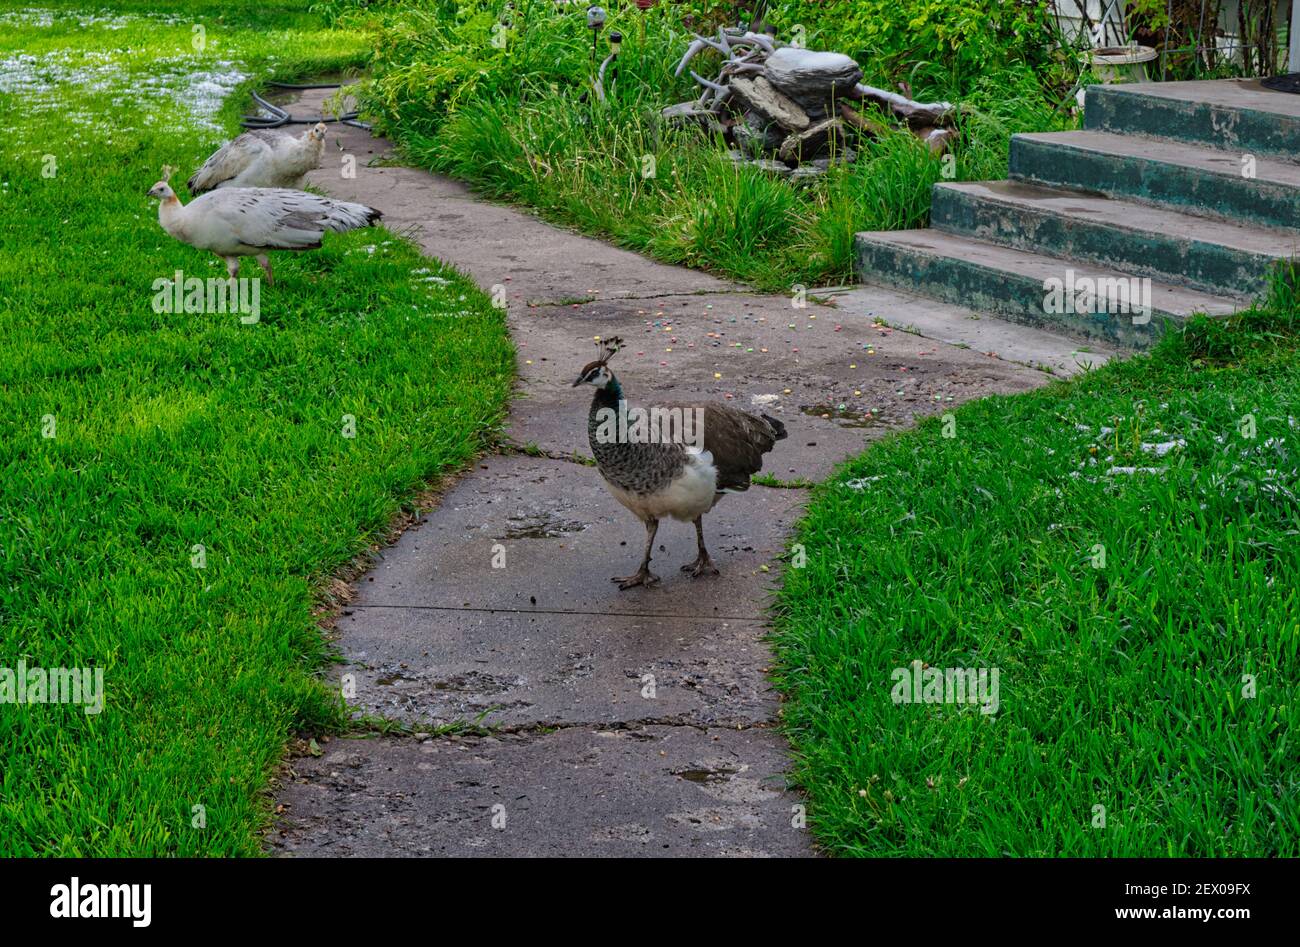 A natural view of Indian peafowls on a small pathway in a park Stock Photo